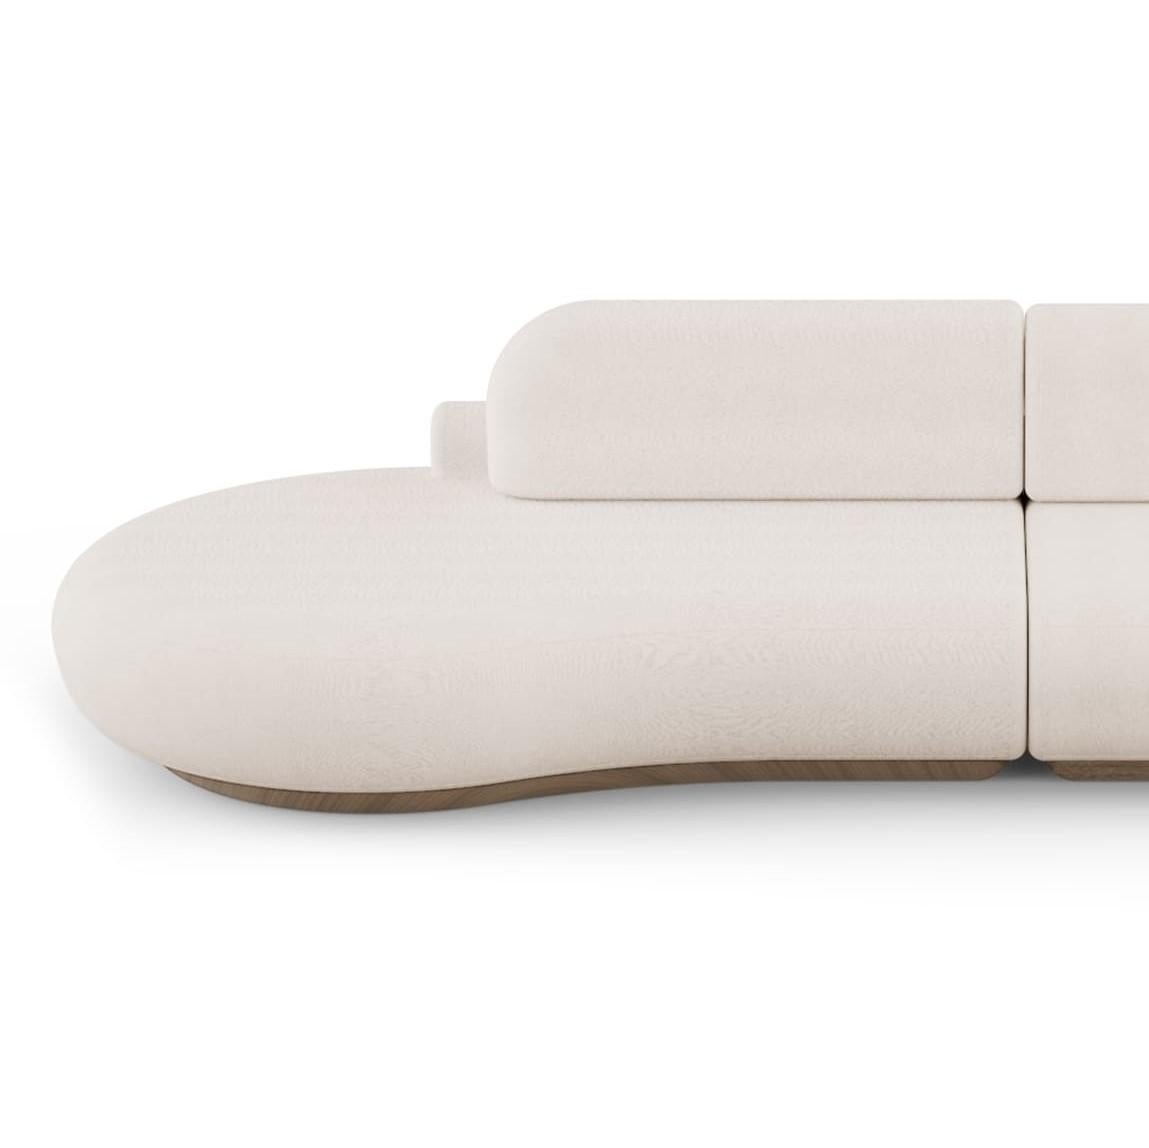 Naked sofa by Dooq
Dimensions: W 352 x D 132 x H 78 cm
Seat height 40 cm
Materials: Base beechwood
Upholstery smooth velvet
Also available in synthetic leather  

Naked sofa reveals sculptural and organic shape meant to embrace the user and